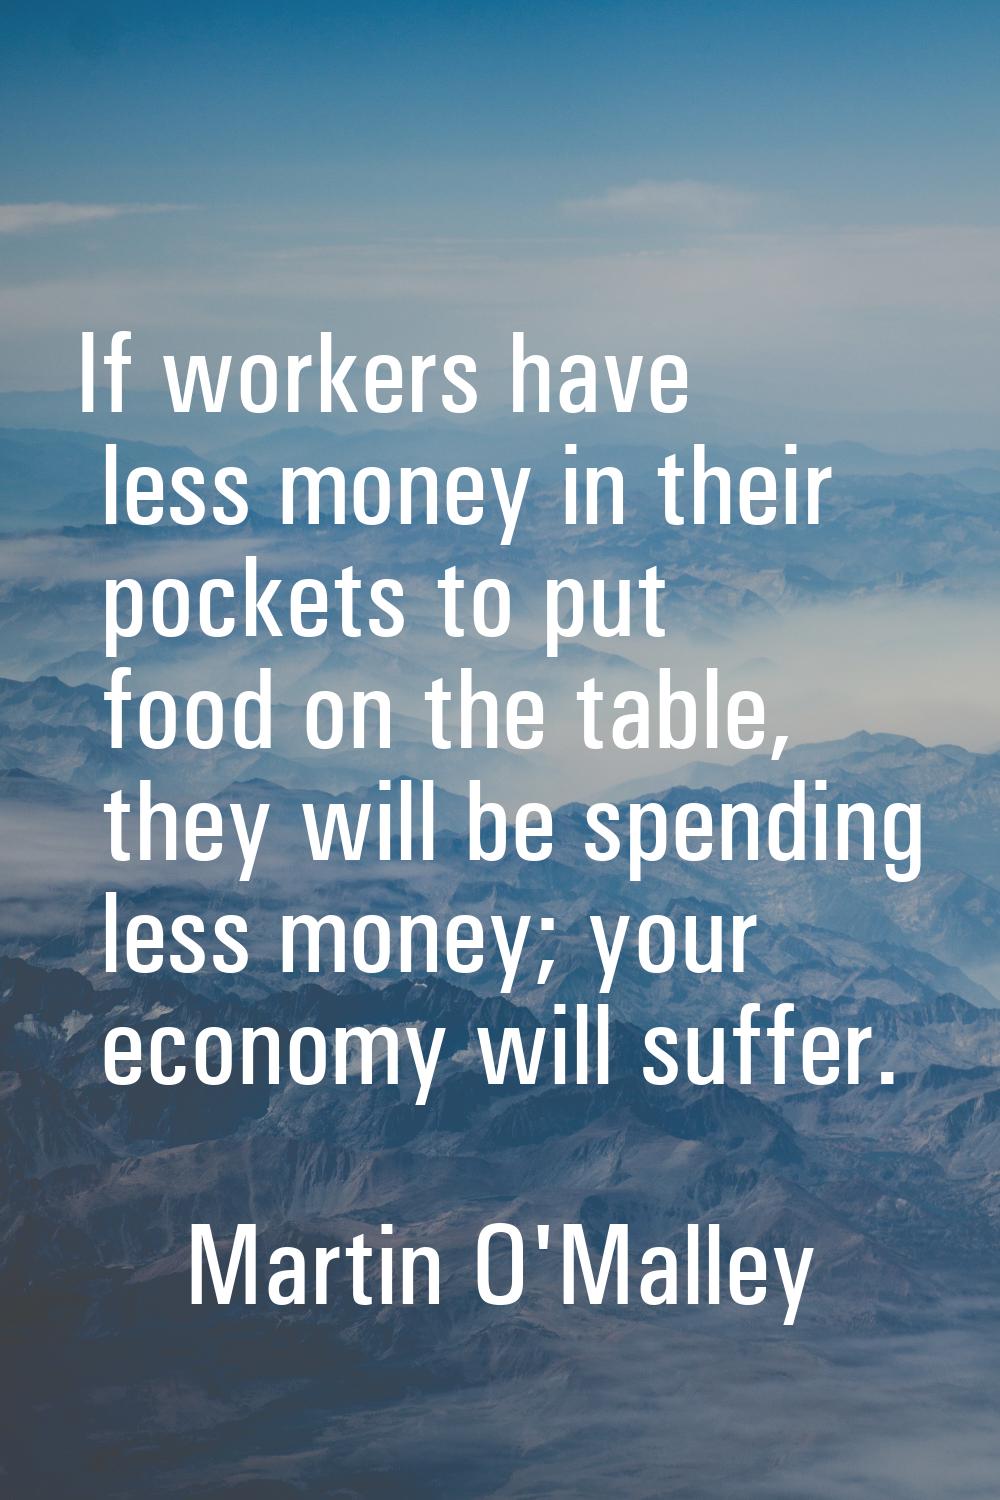 If workers have less money in their pockets to put food on the table, they will be spending less mo